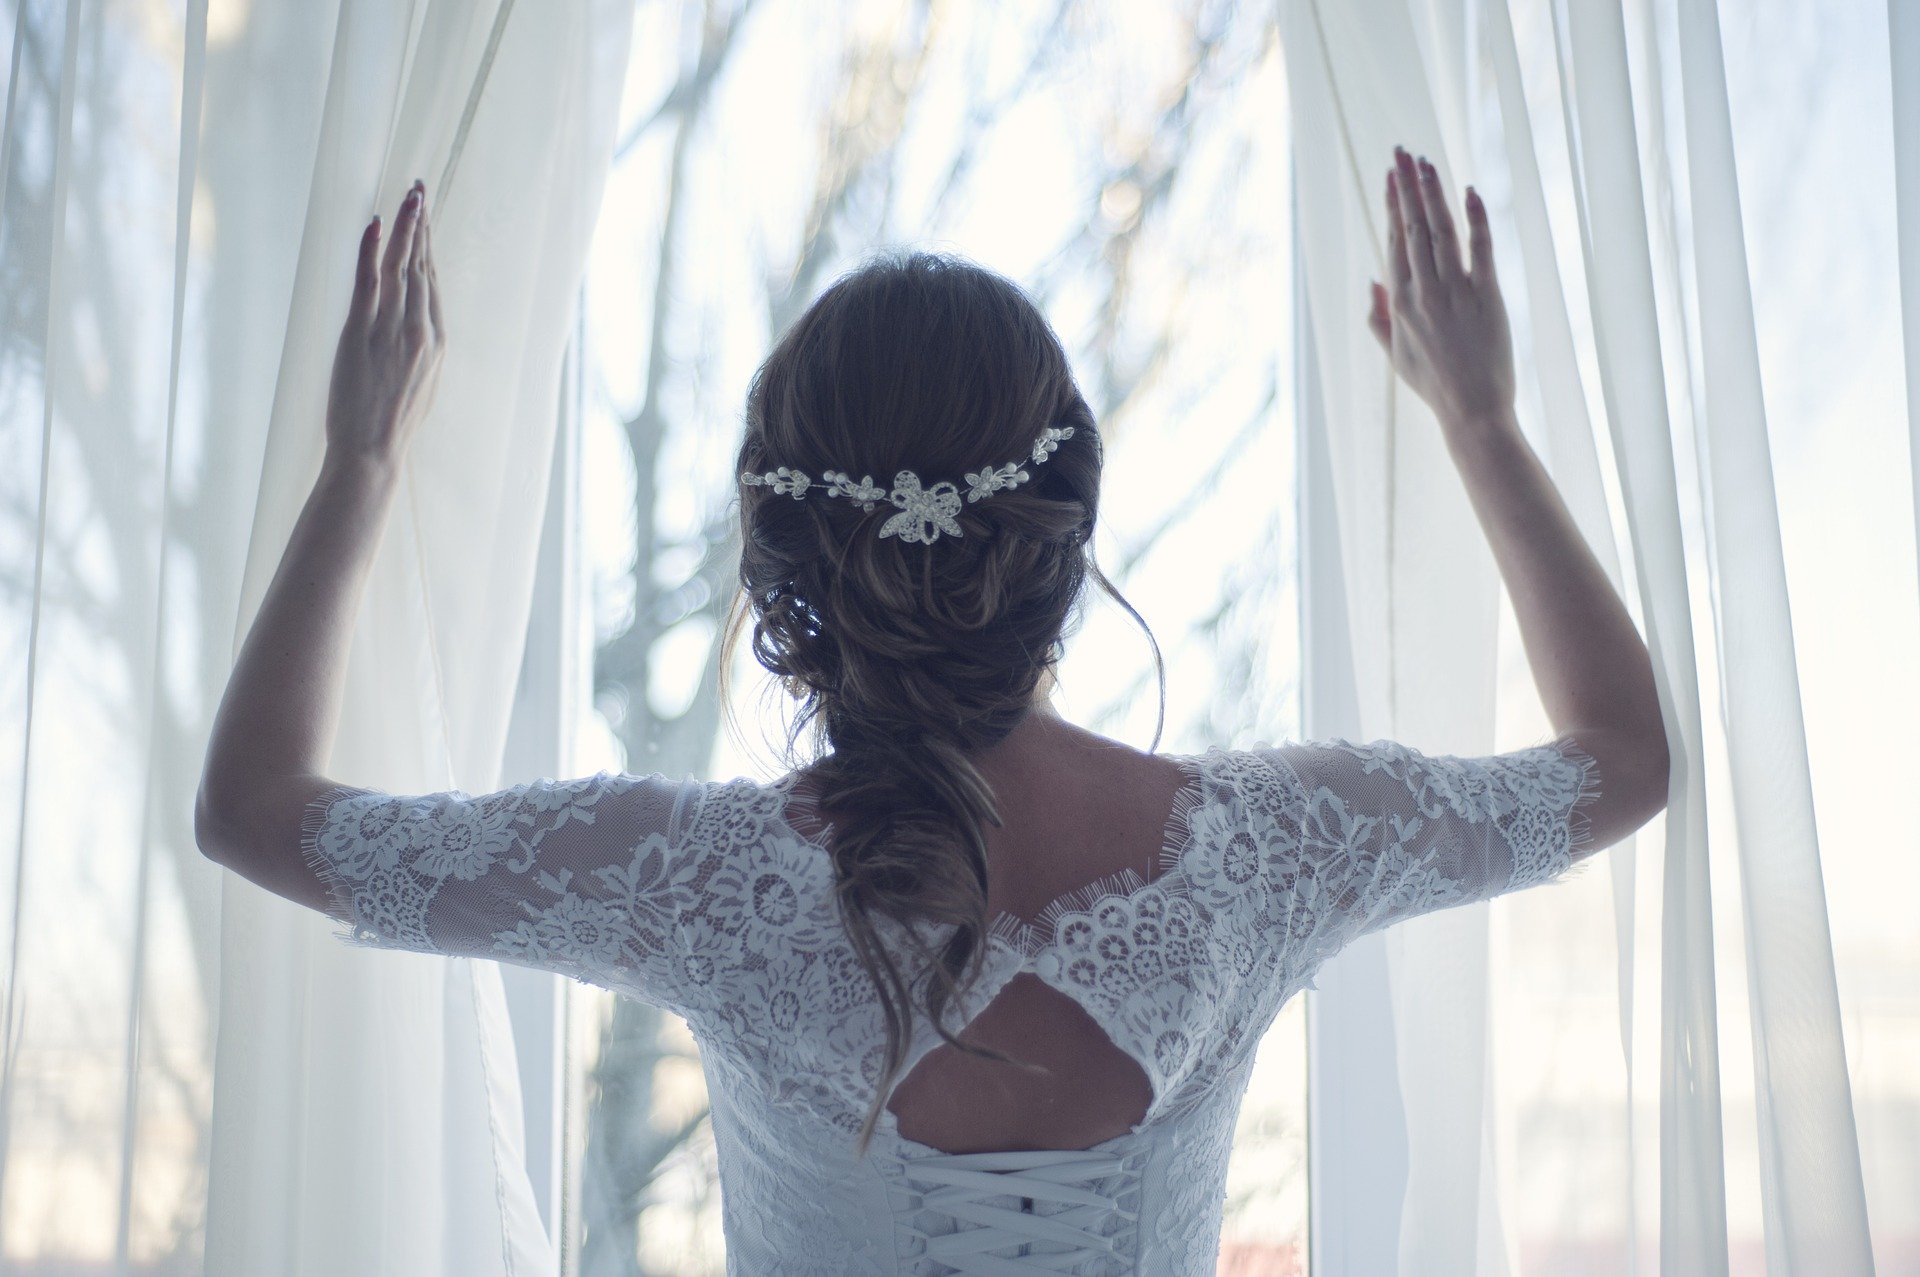 A bride wearing a lace wedding gown by a window. | Source: Pixabay